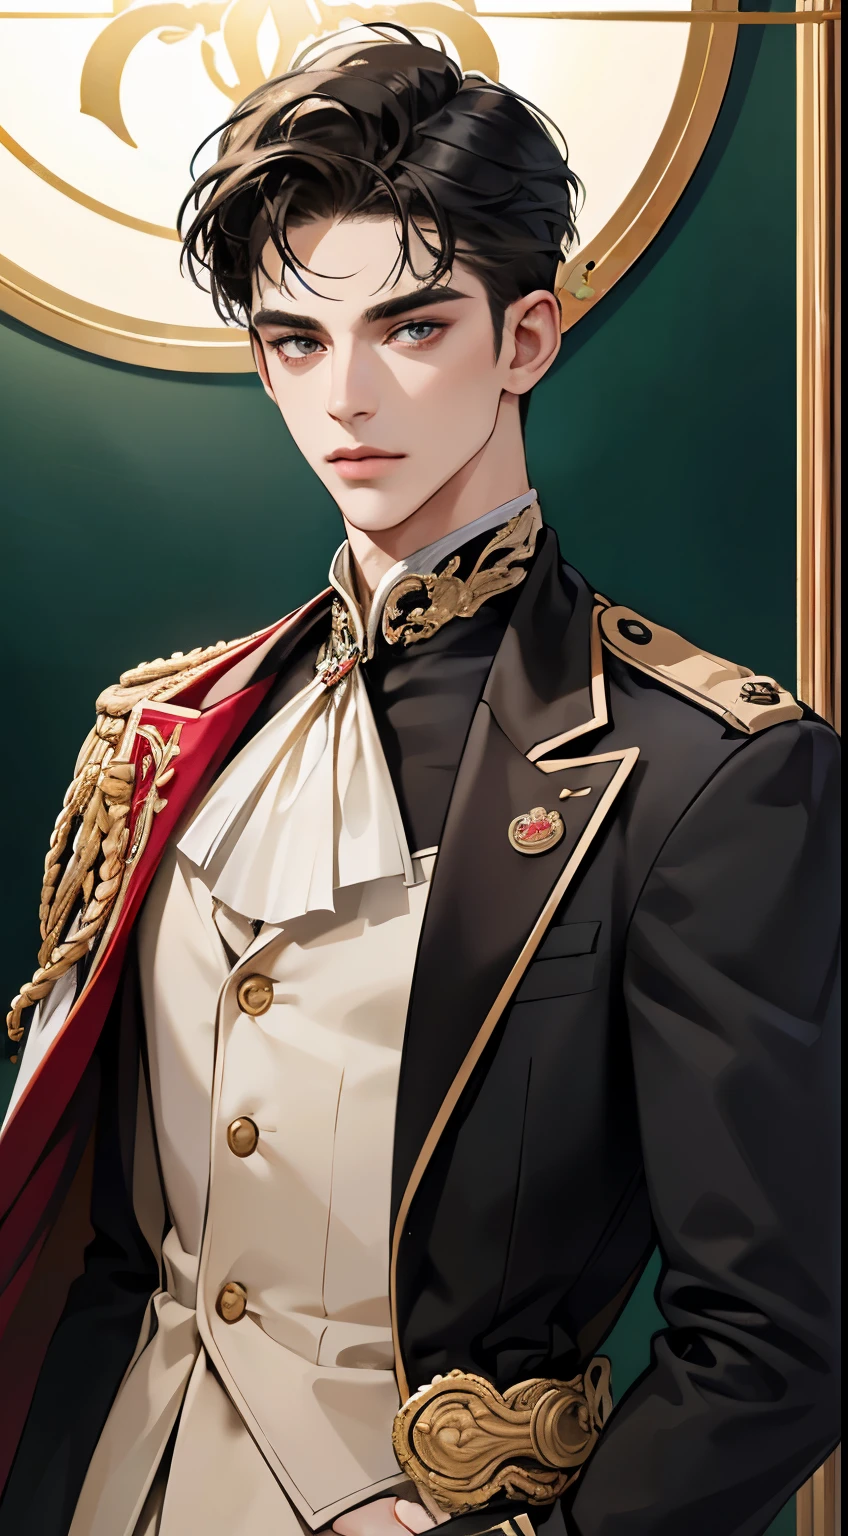 (Exaggerated, high resolution, high quality, high definition, masterpiece, top quality) 19-year-old man with handsome, short hair, detailed eyes and a detailed face, strikingly handsome, chiseled jawline, deep gaze, full hair, modern hairstyle, military uniform, golden headband, formal attire, confident posture, upscale suit, sophisticated design, silk fabric, tailored fit, glossy finish, composed, elegant background, high resolution, realistic, vibrant colors, dynamic lighting, sharp details